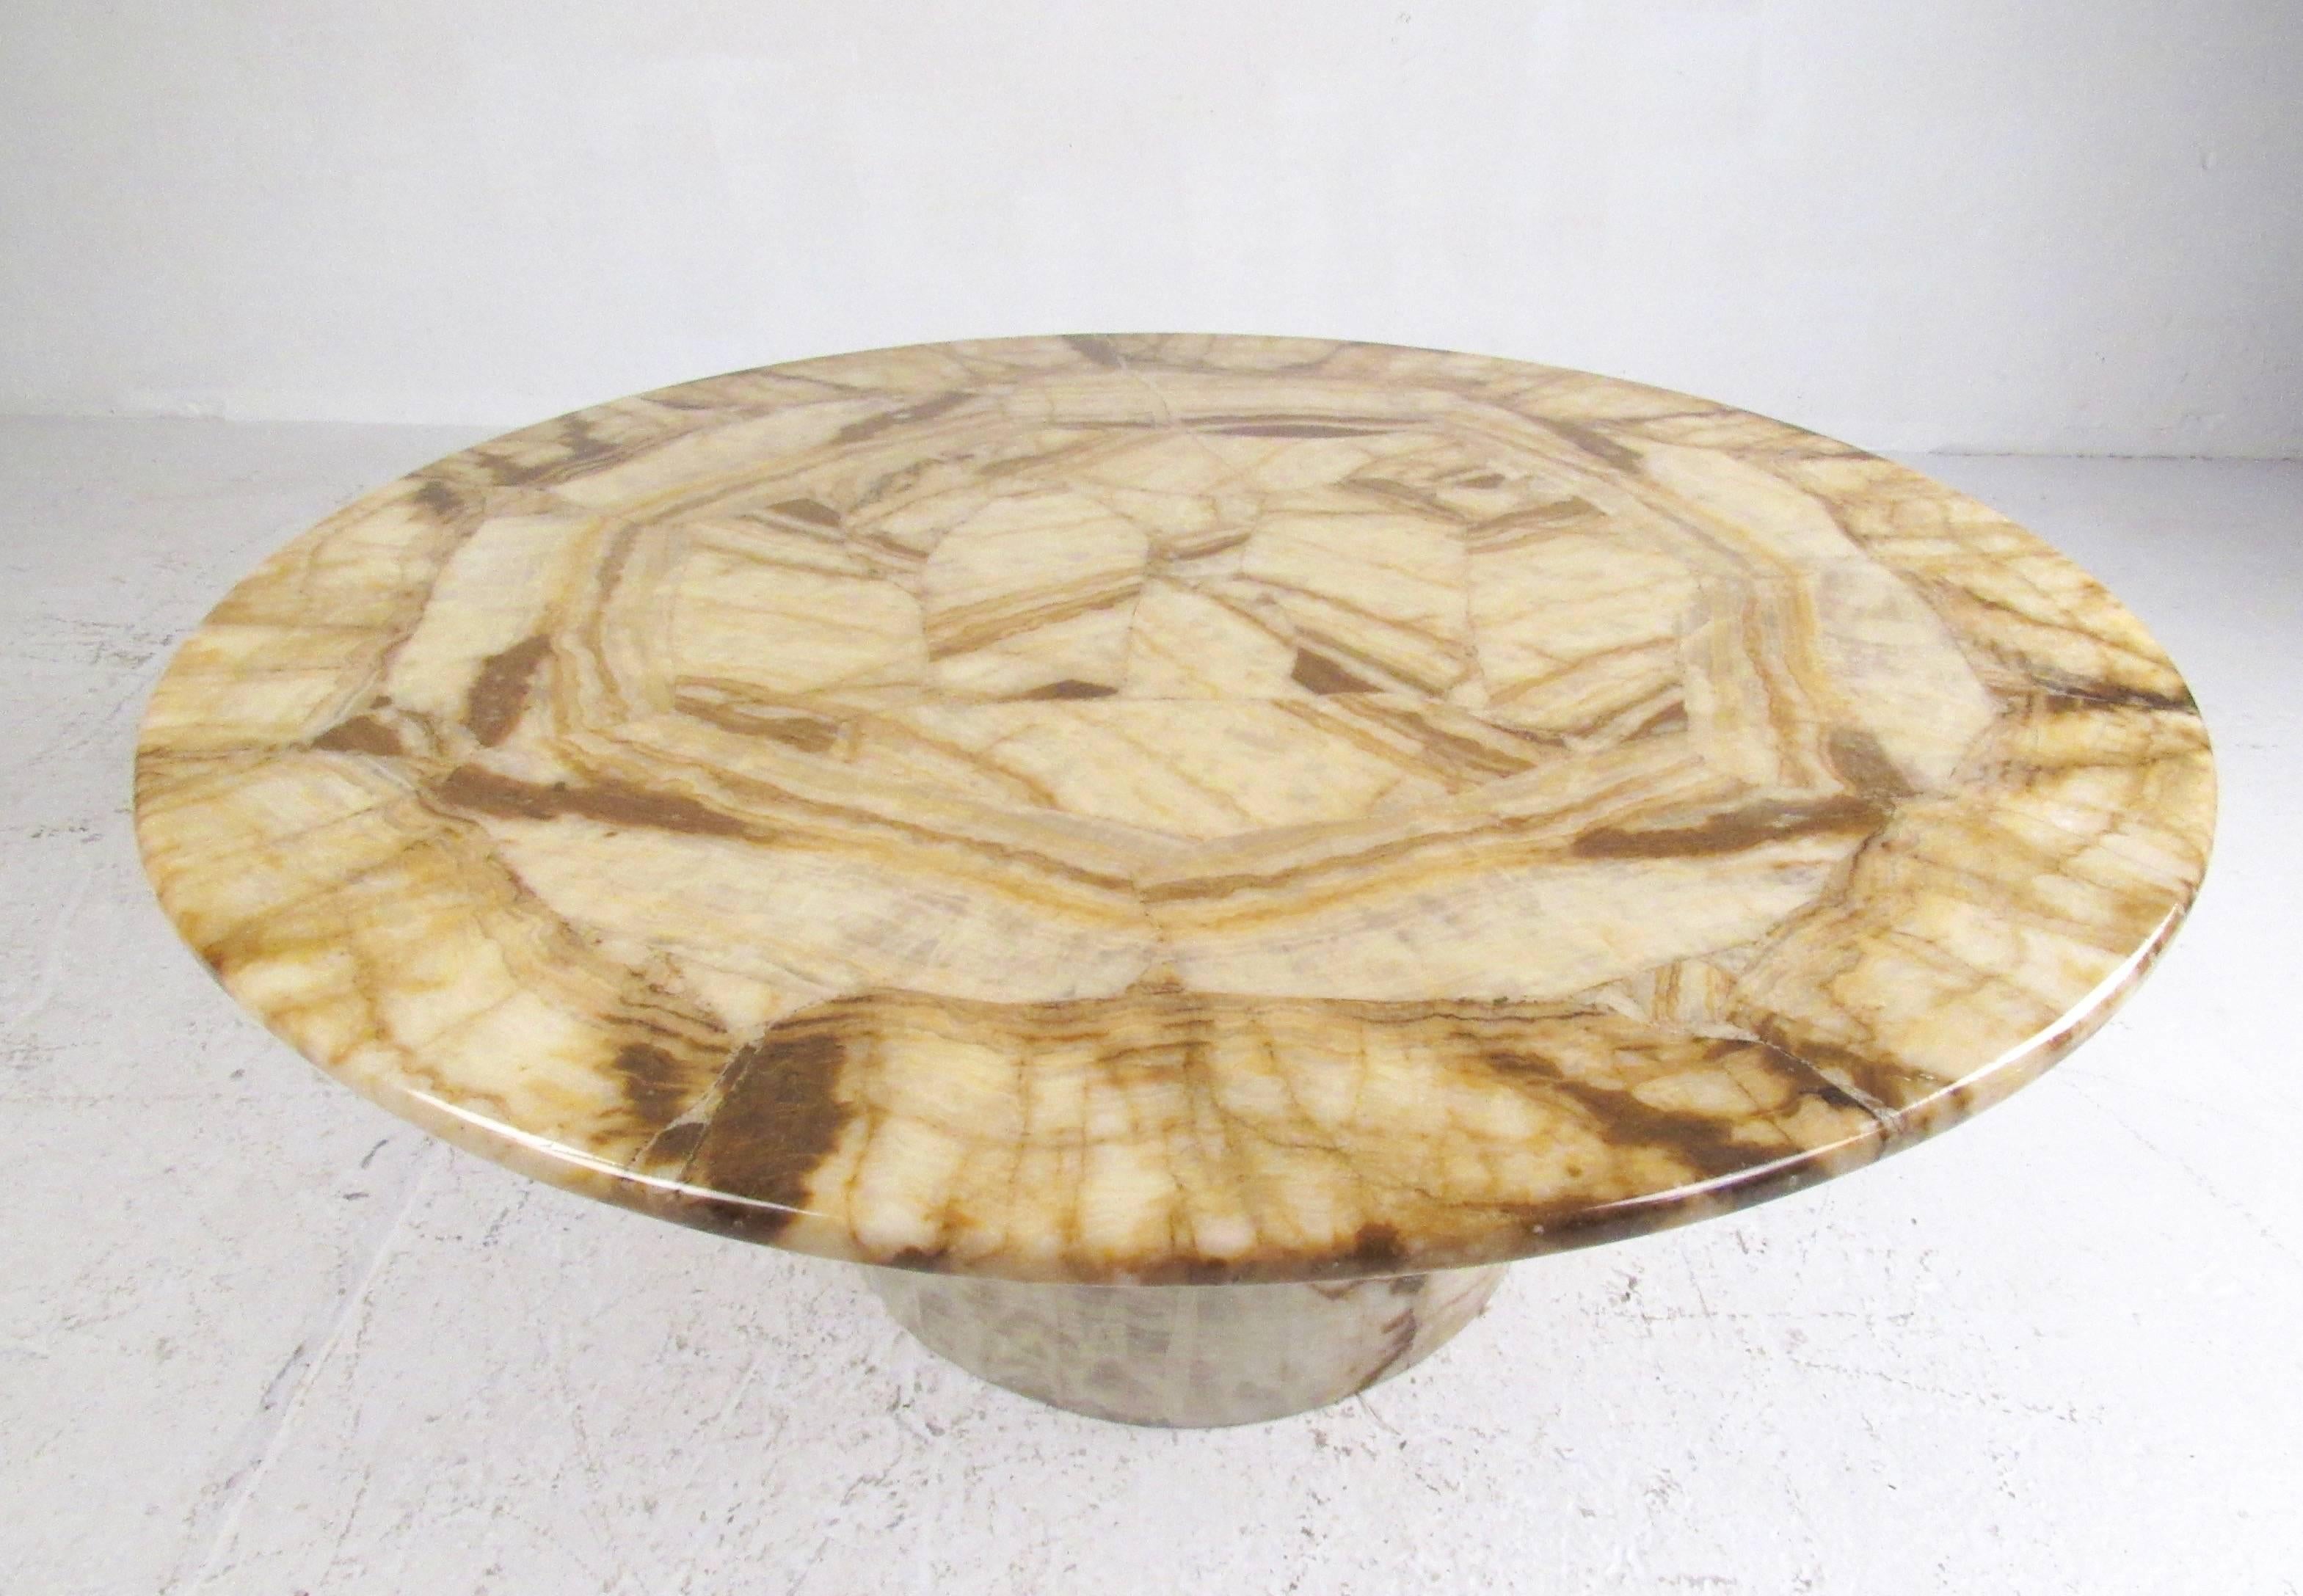 This unique vintage coffee table features a stone finish veneer over wood core. Mid-Century Modern design and 1970s palette add to the retro appeal of this circular table. Striking pedestal cocktail table for home or business seating area. Please